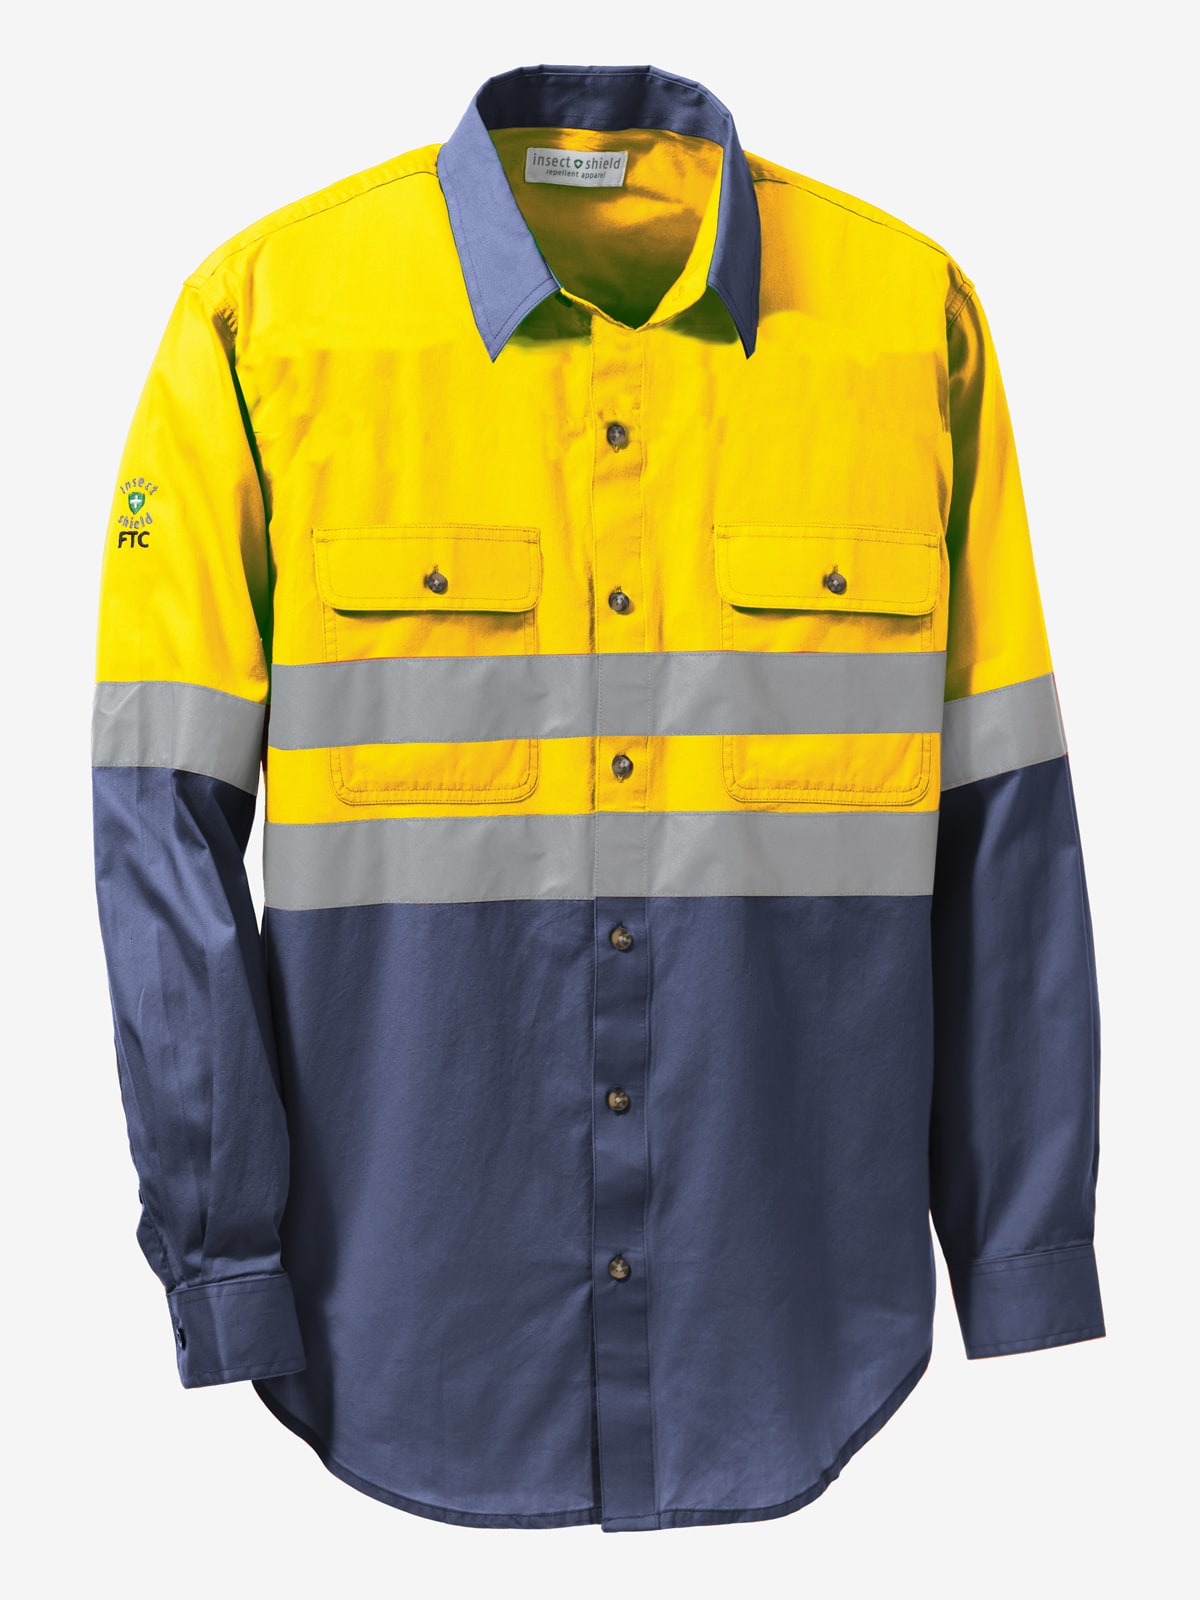 Insect Shield Men's Two-Tone Work Shirt with Hi-Vis